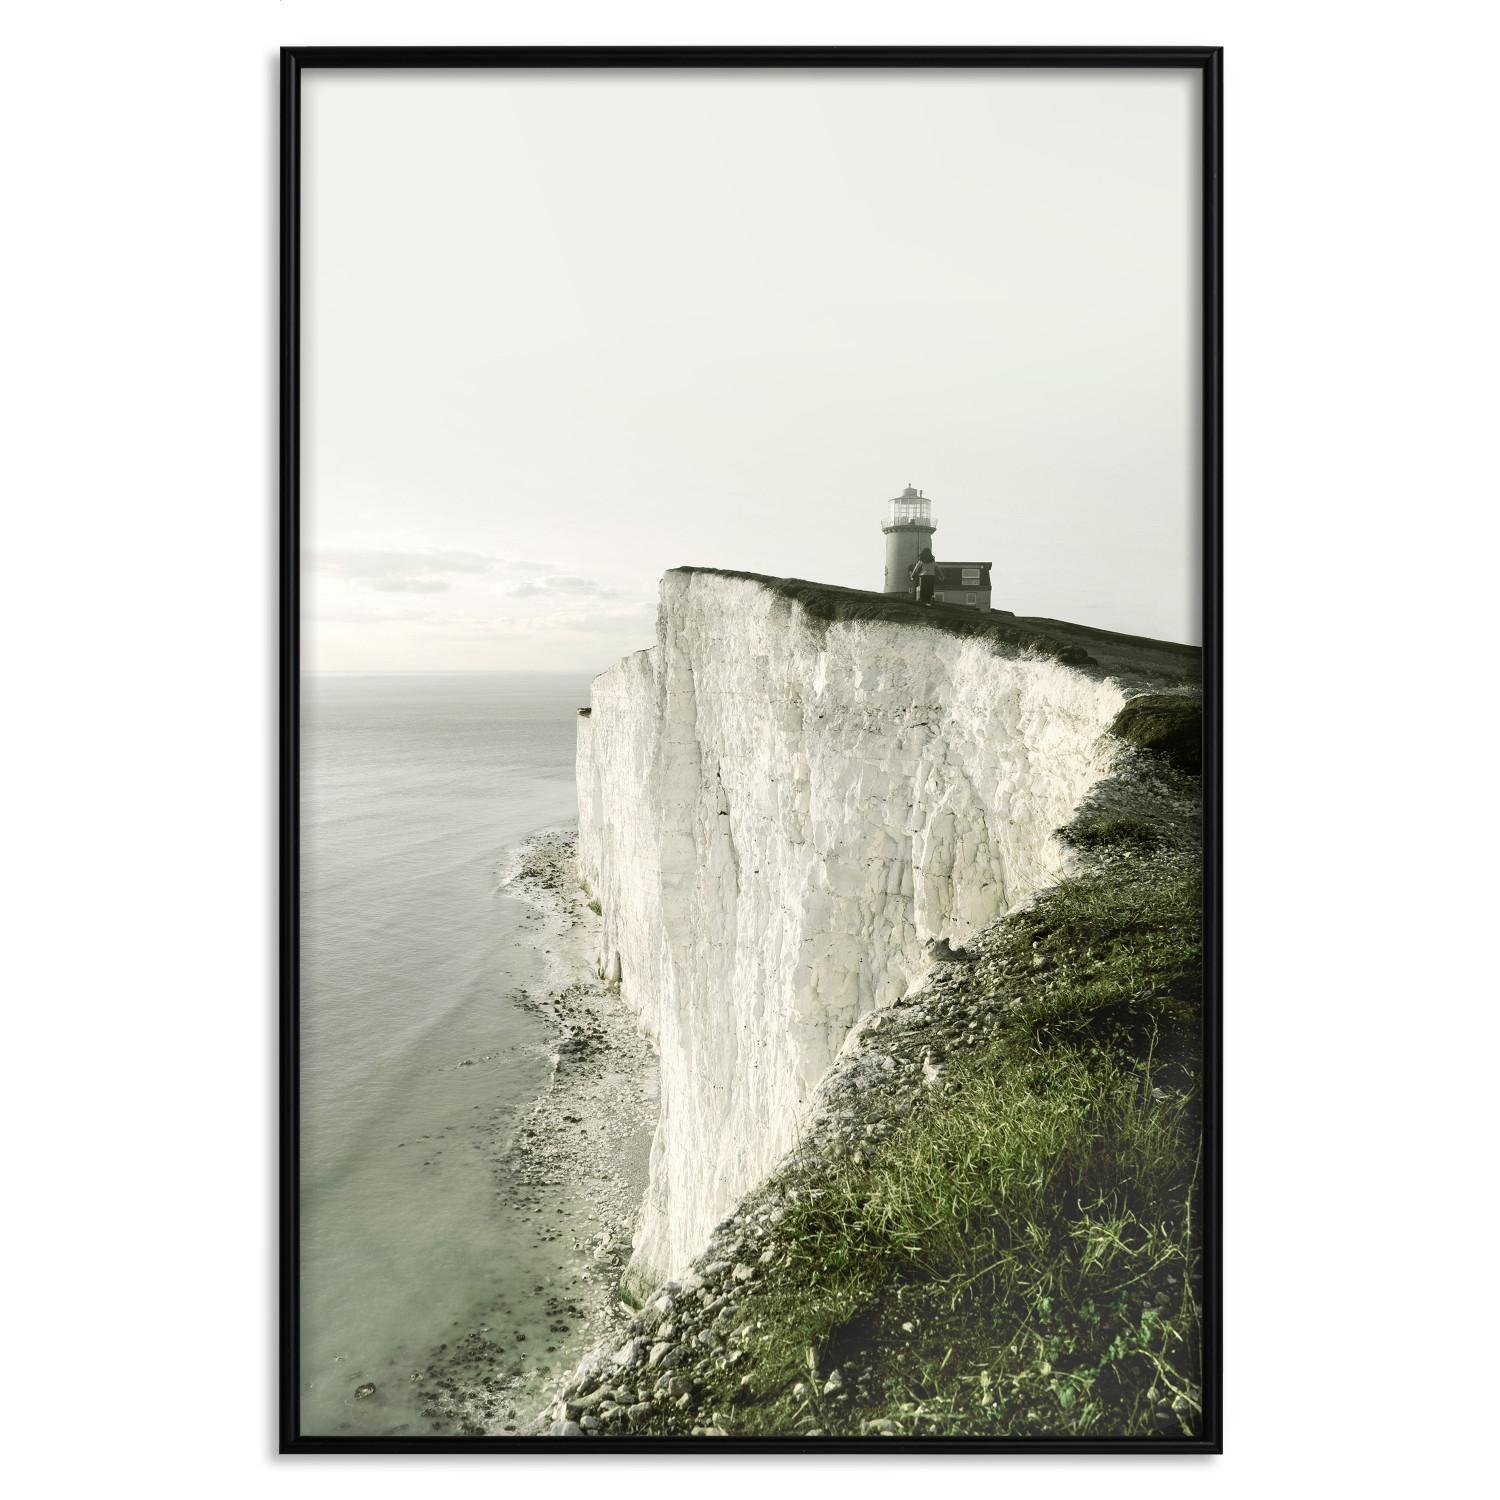 Gallery wall On the Edge - landscape of a gigantic cliff with a lighthouse on top